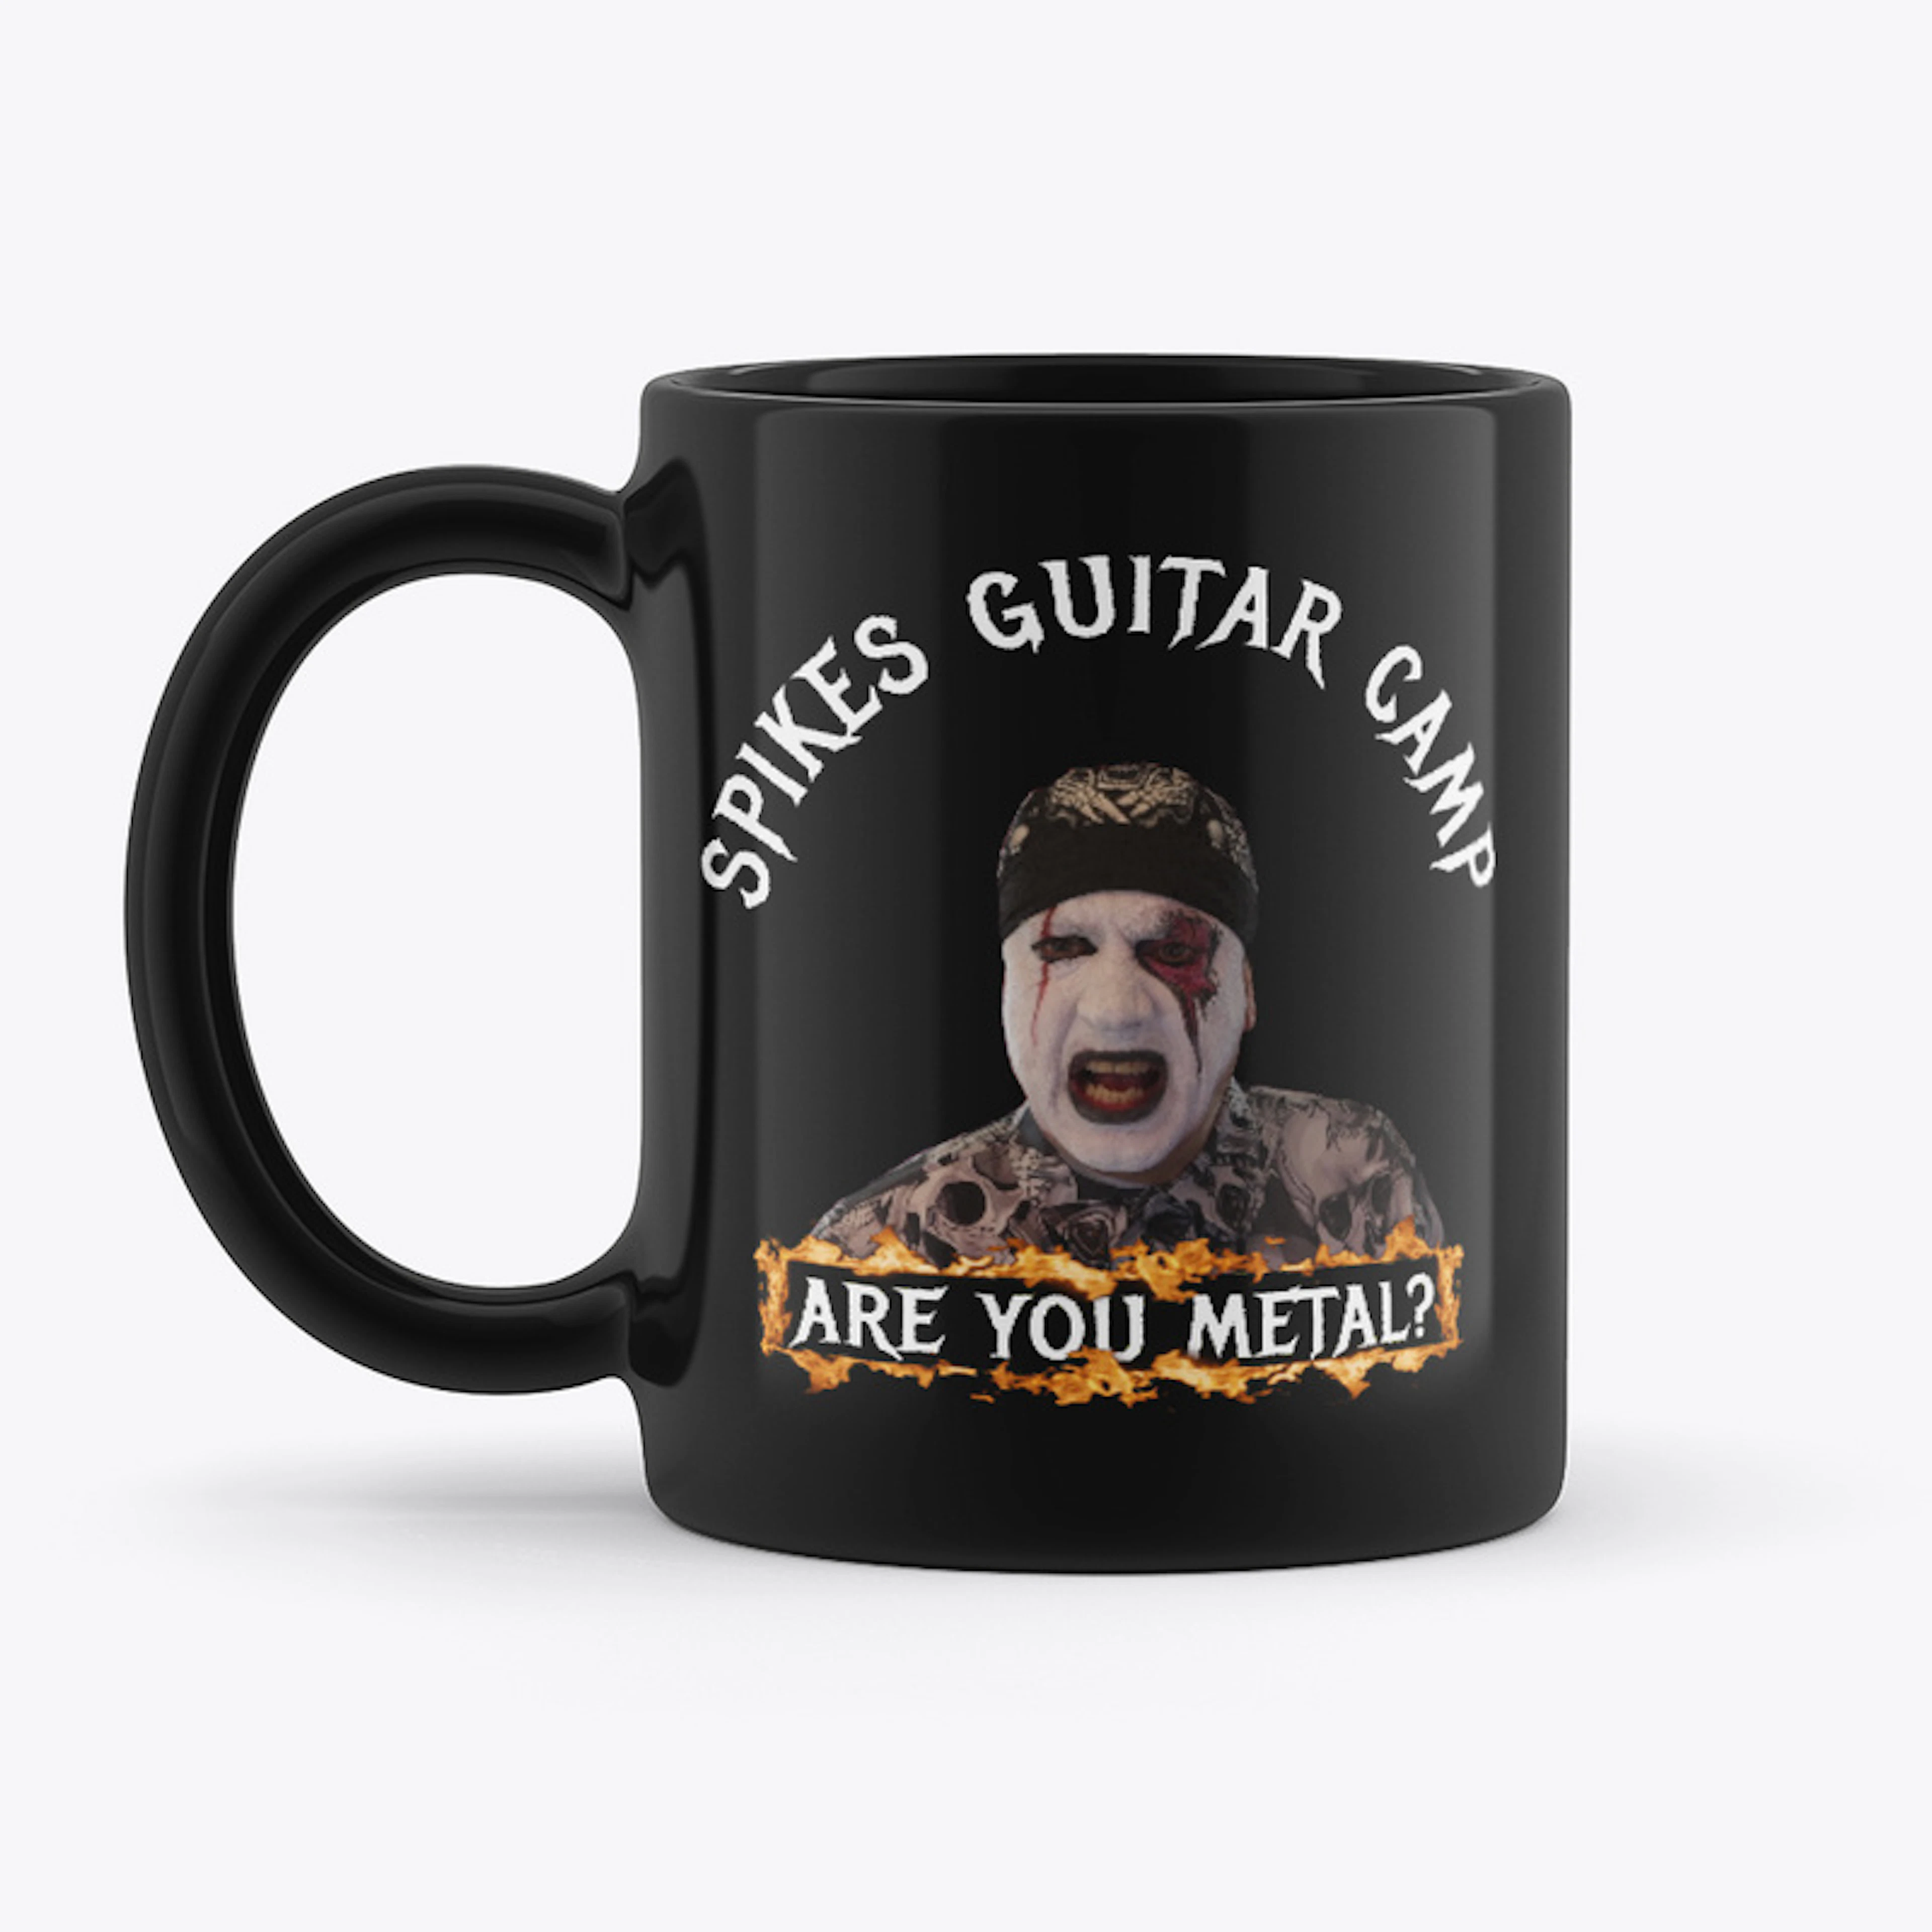 SPIKE'S GUITAR CAMP - ARE YOU METAL